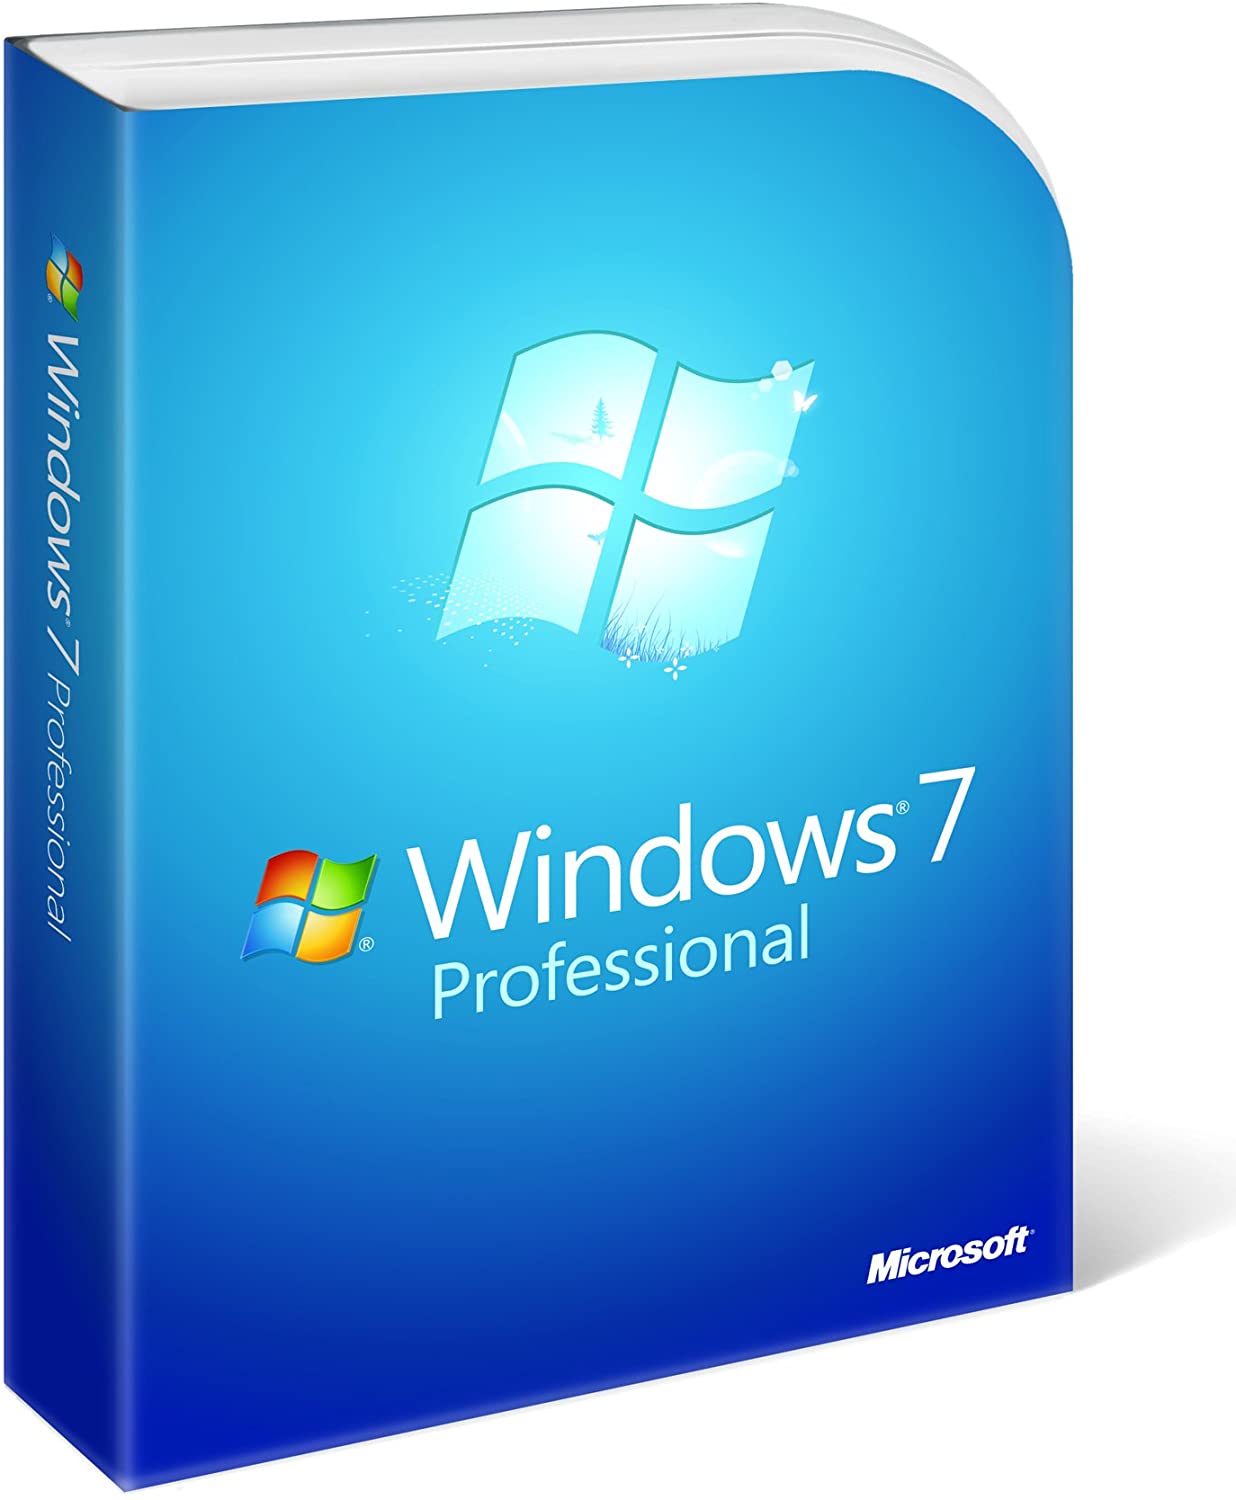 Where Can I Buy A Windows 7 Laptop Uk?